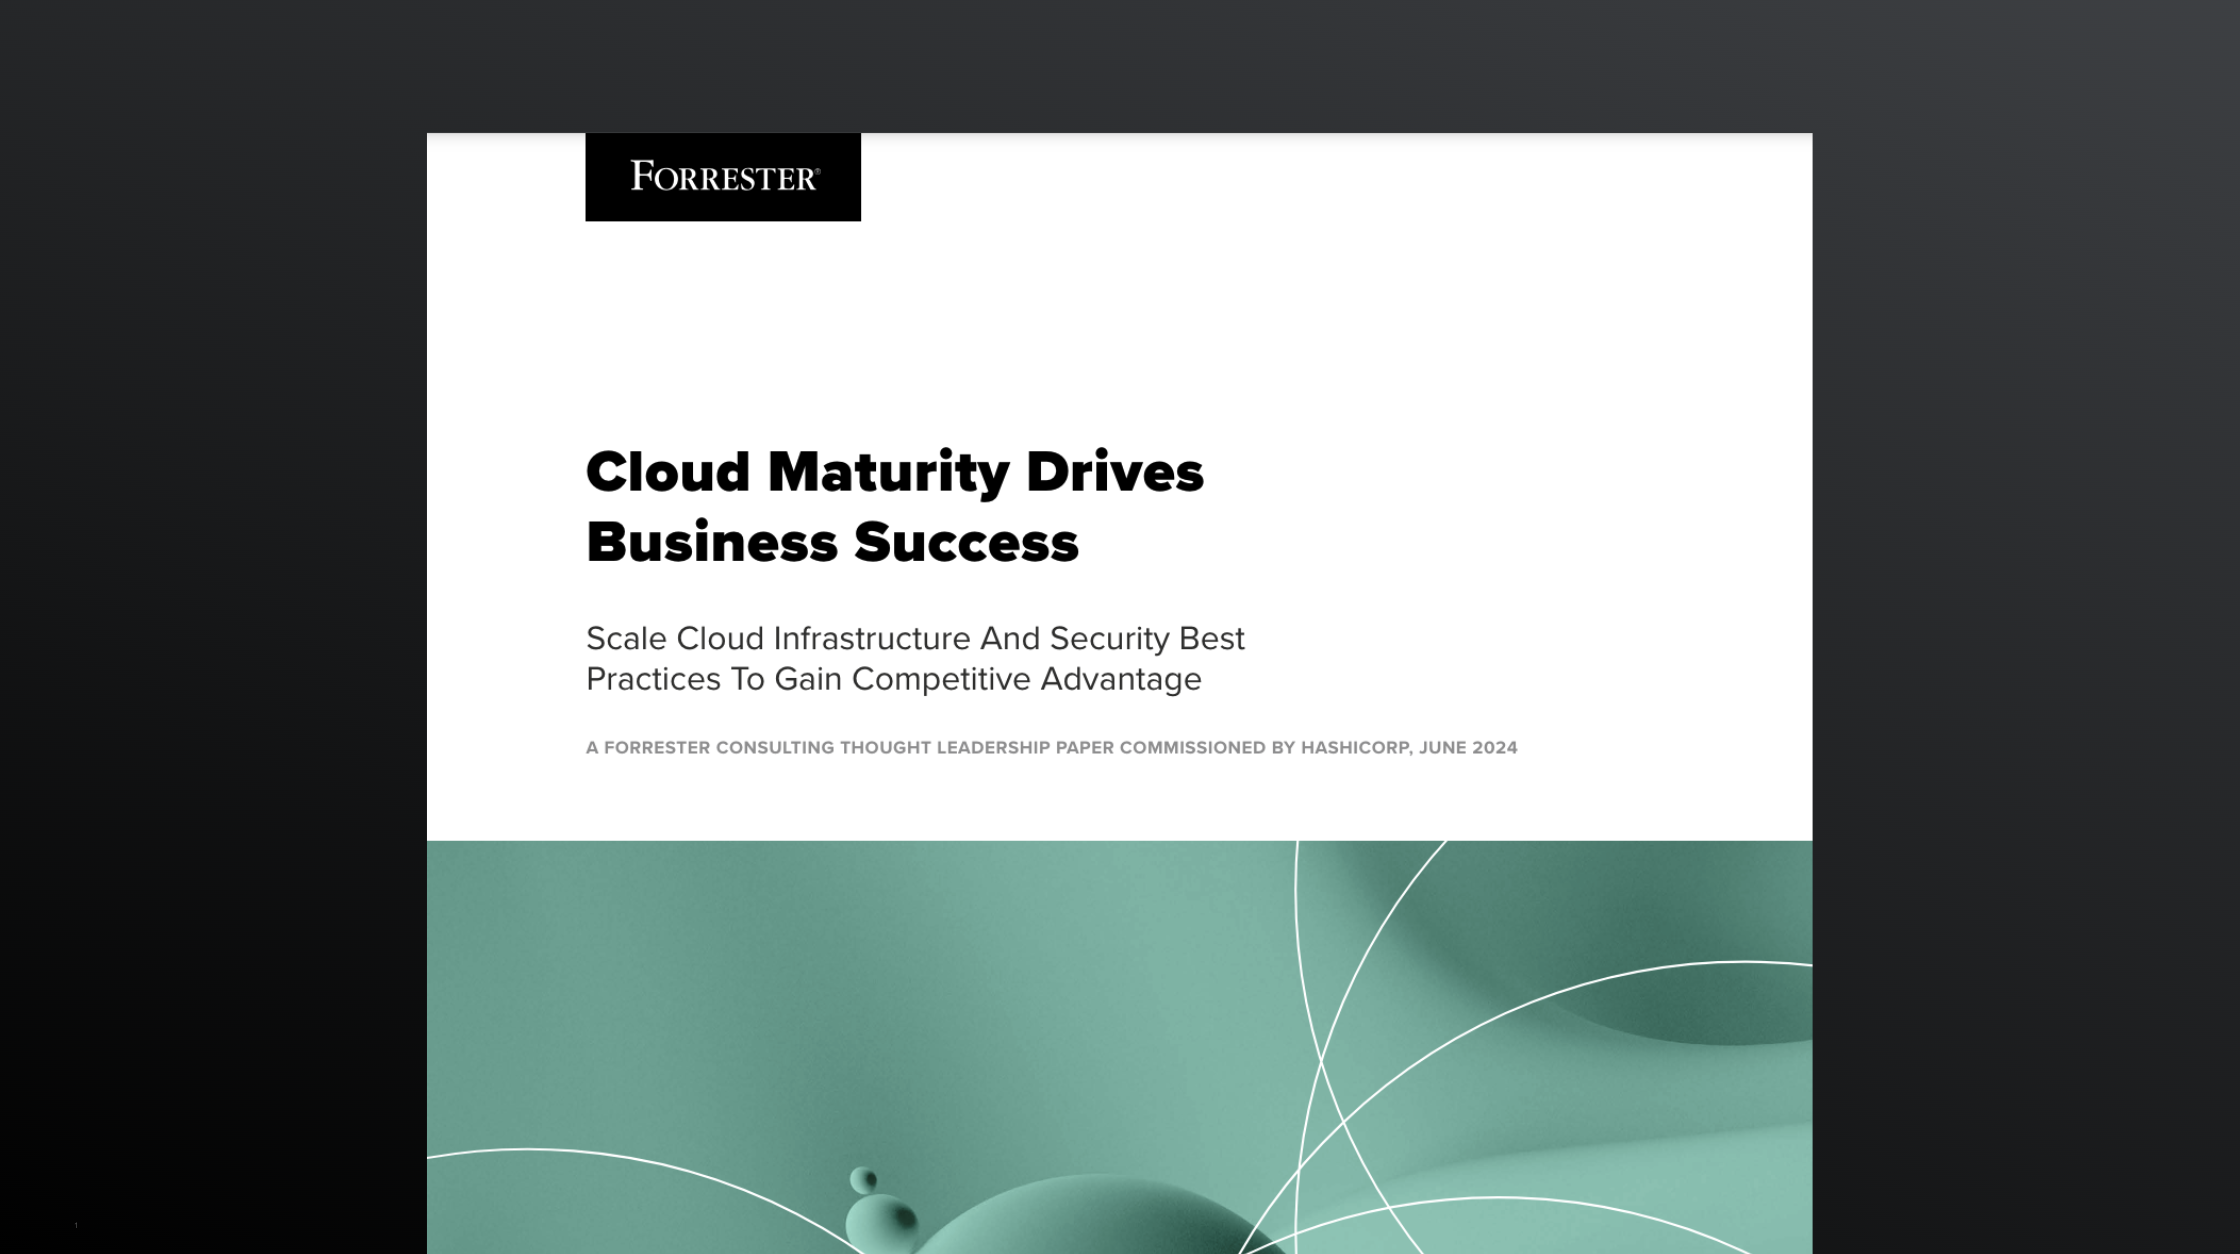 HashiCorp State of Cloud Strategy Survey 2024: Forrester’s key recommendations